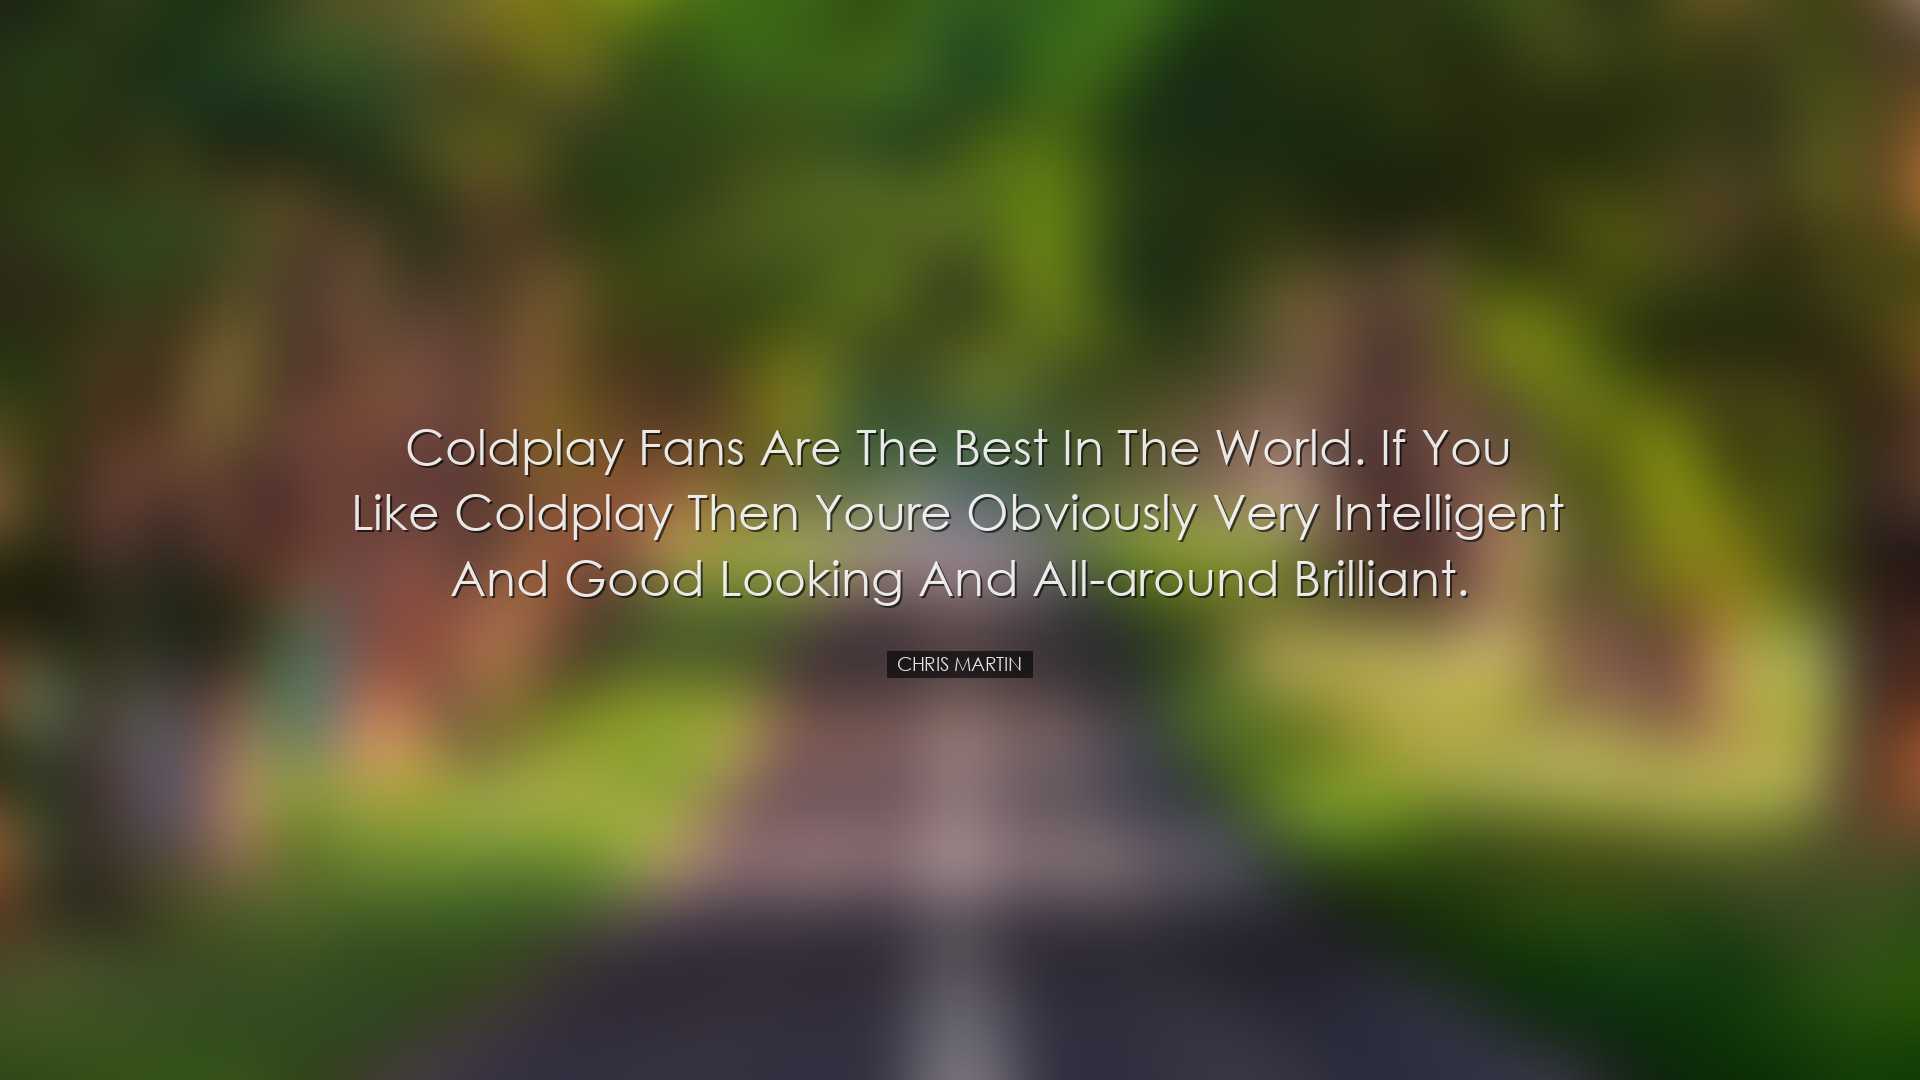 Coldplay fans are the best in the world. If you like Coldplay then